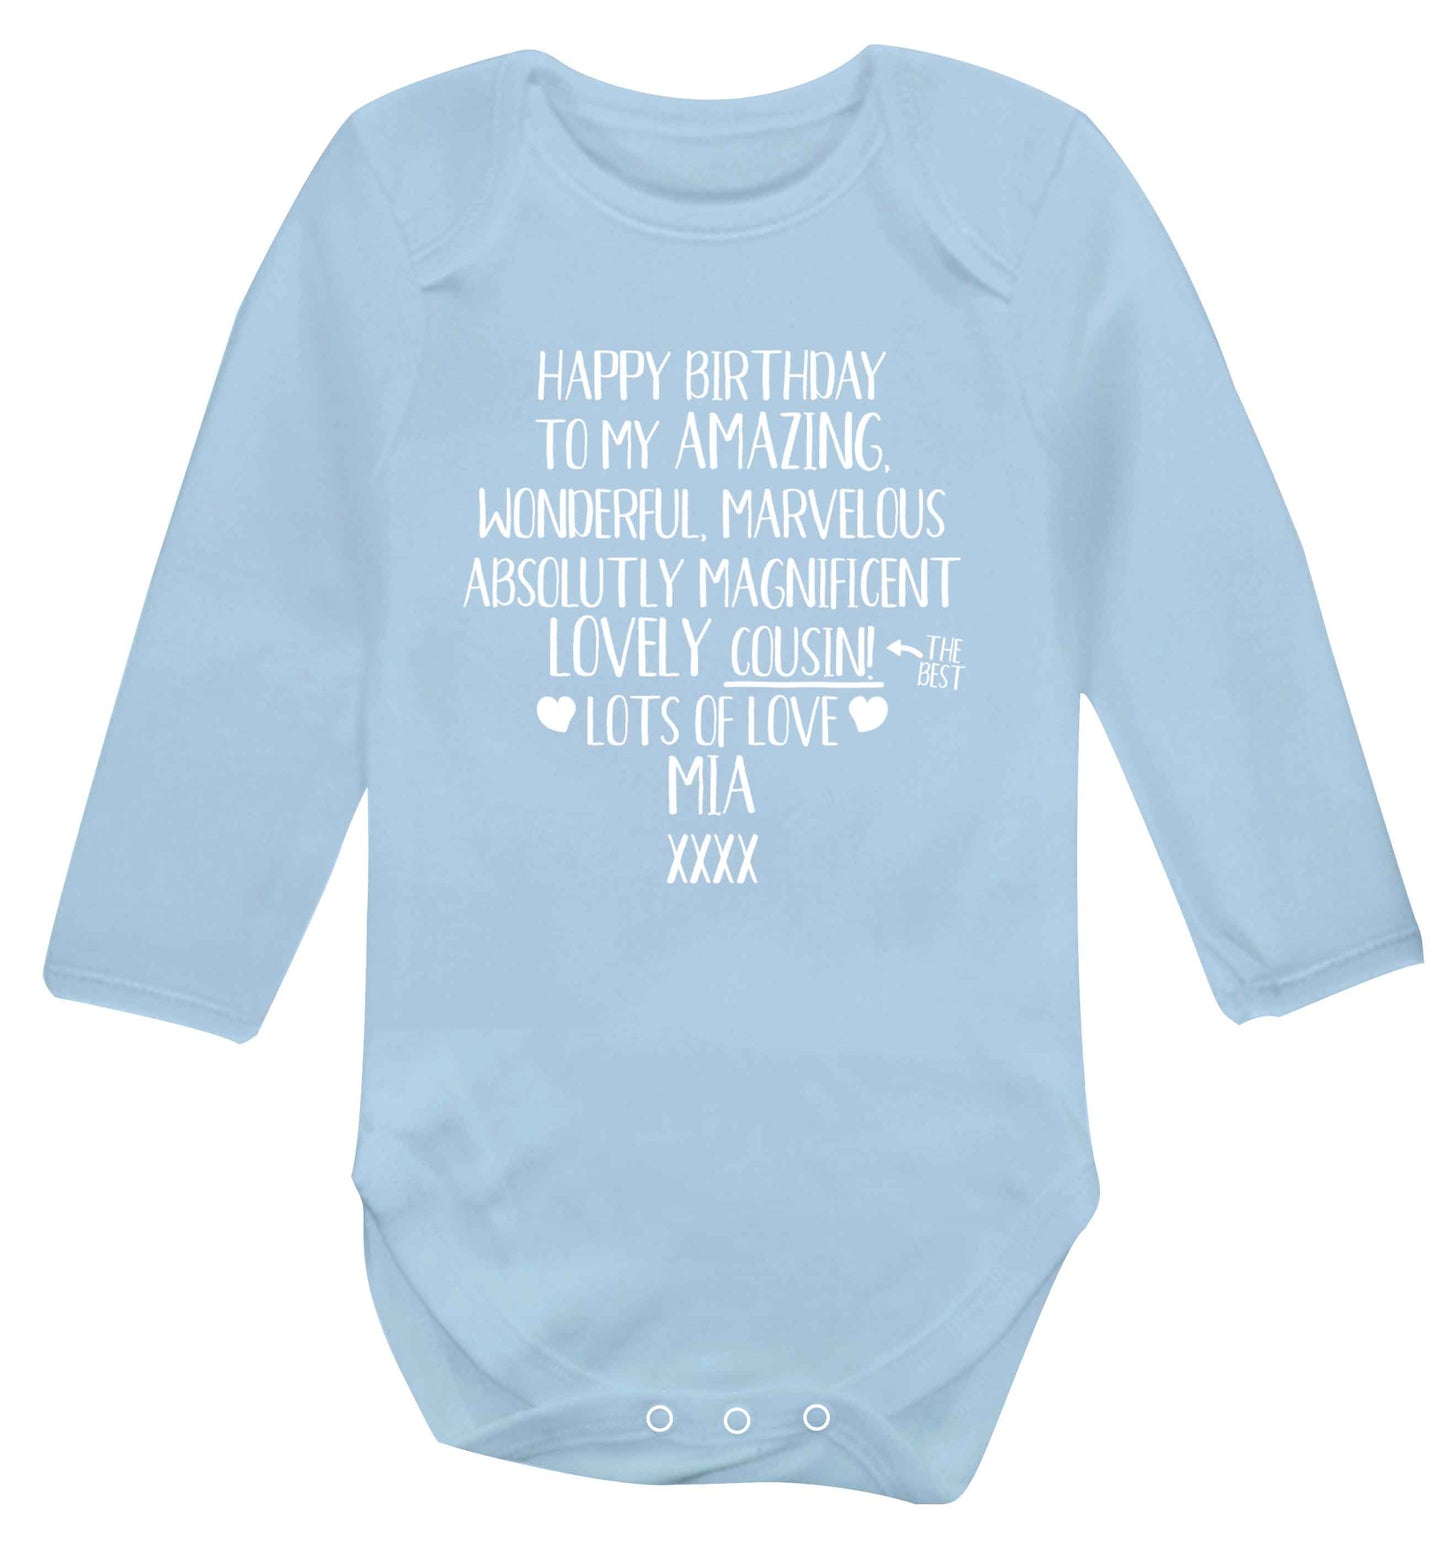 Personalised happy birthday to my amazing, wonderful, lovely cousin Baby Vest long sleeved pale blue 6-12 months